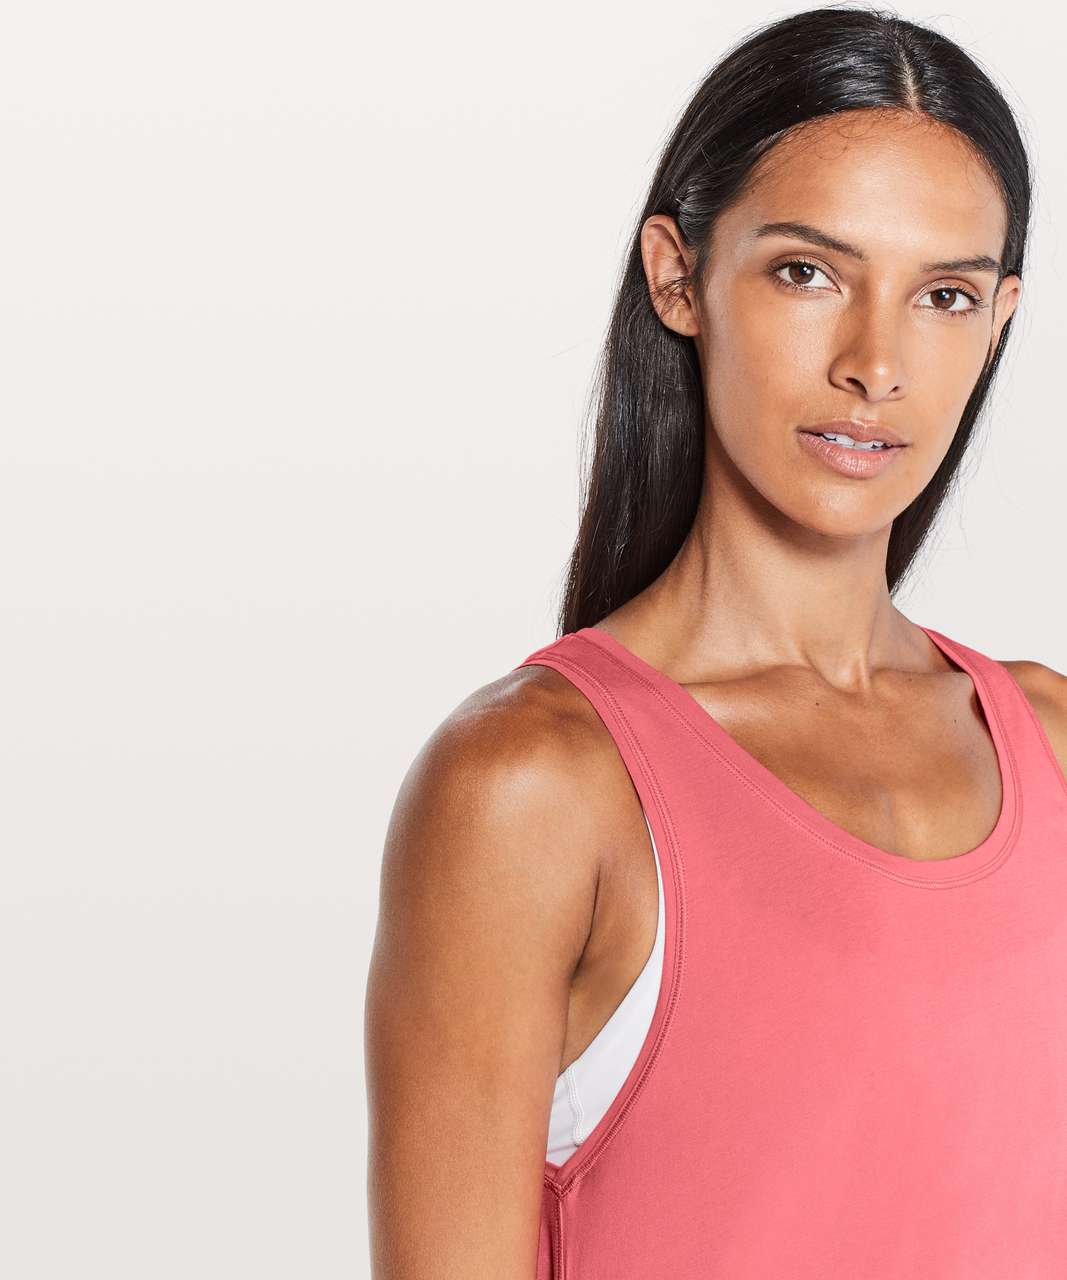 Lululemon To The Point Tank - Glossy